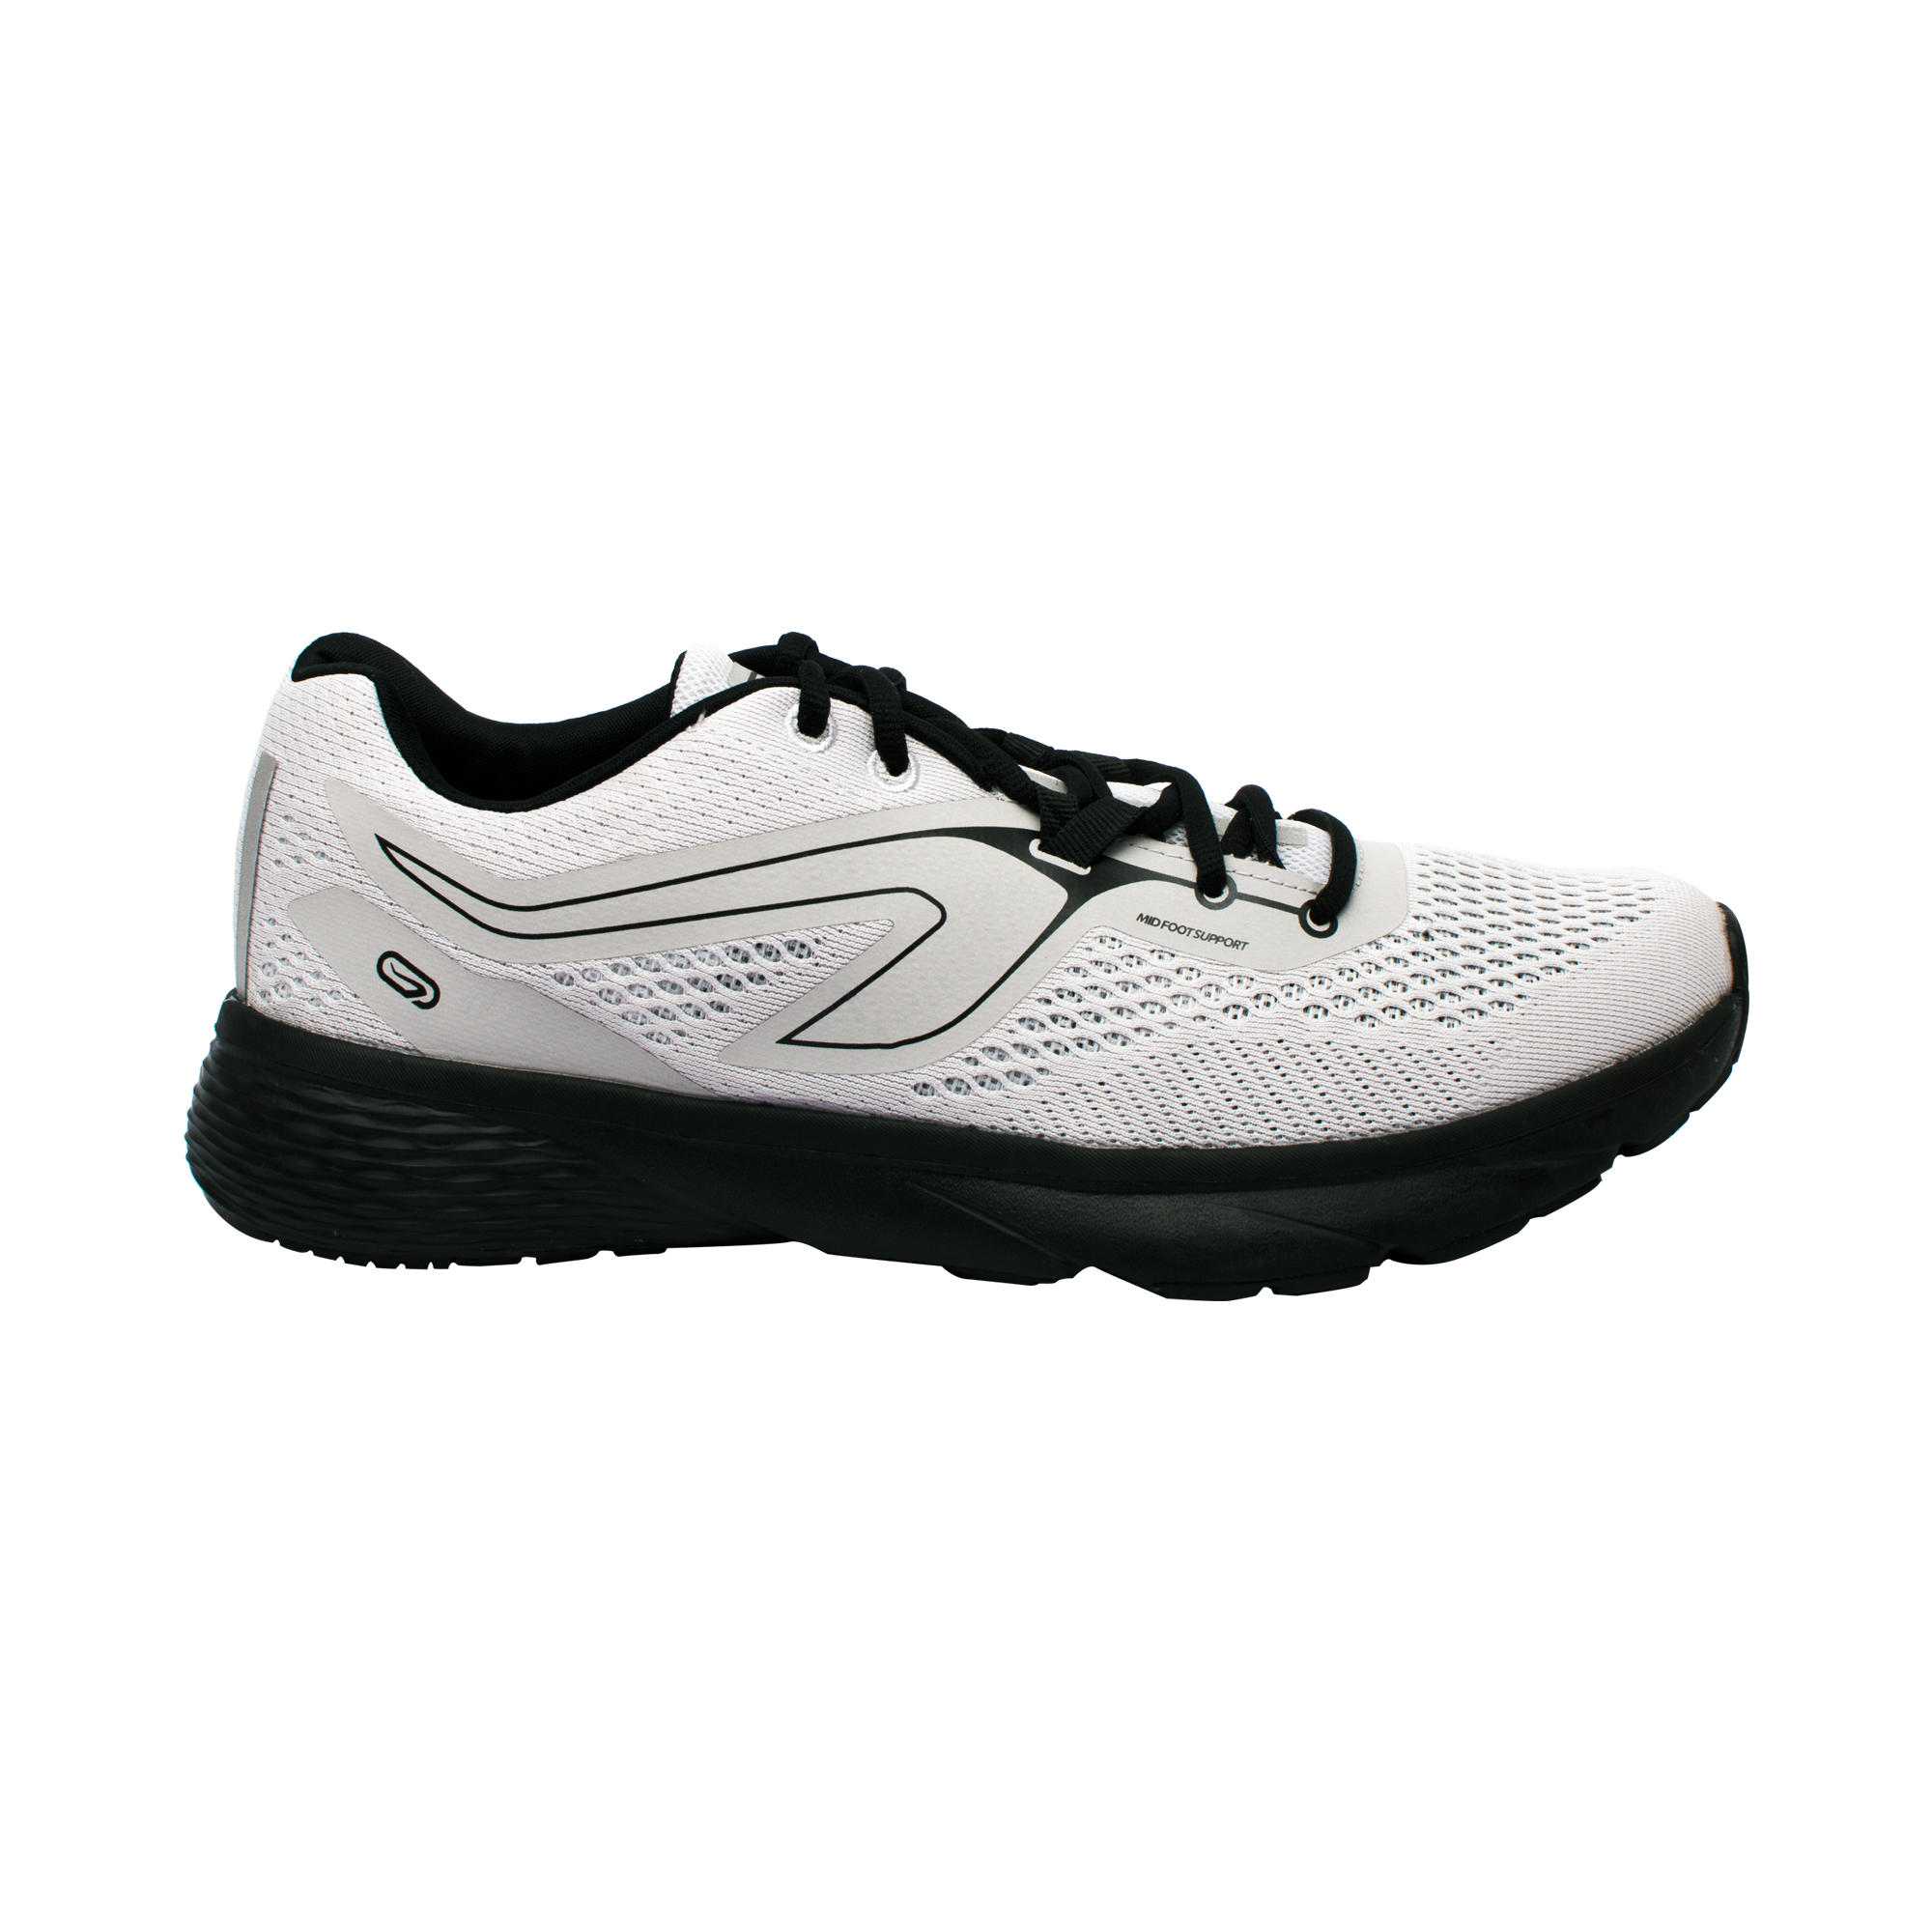 decathlon shoes for running